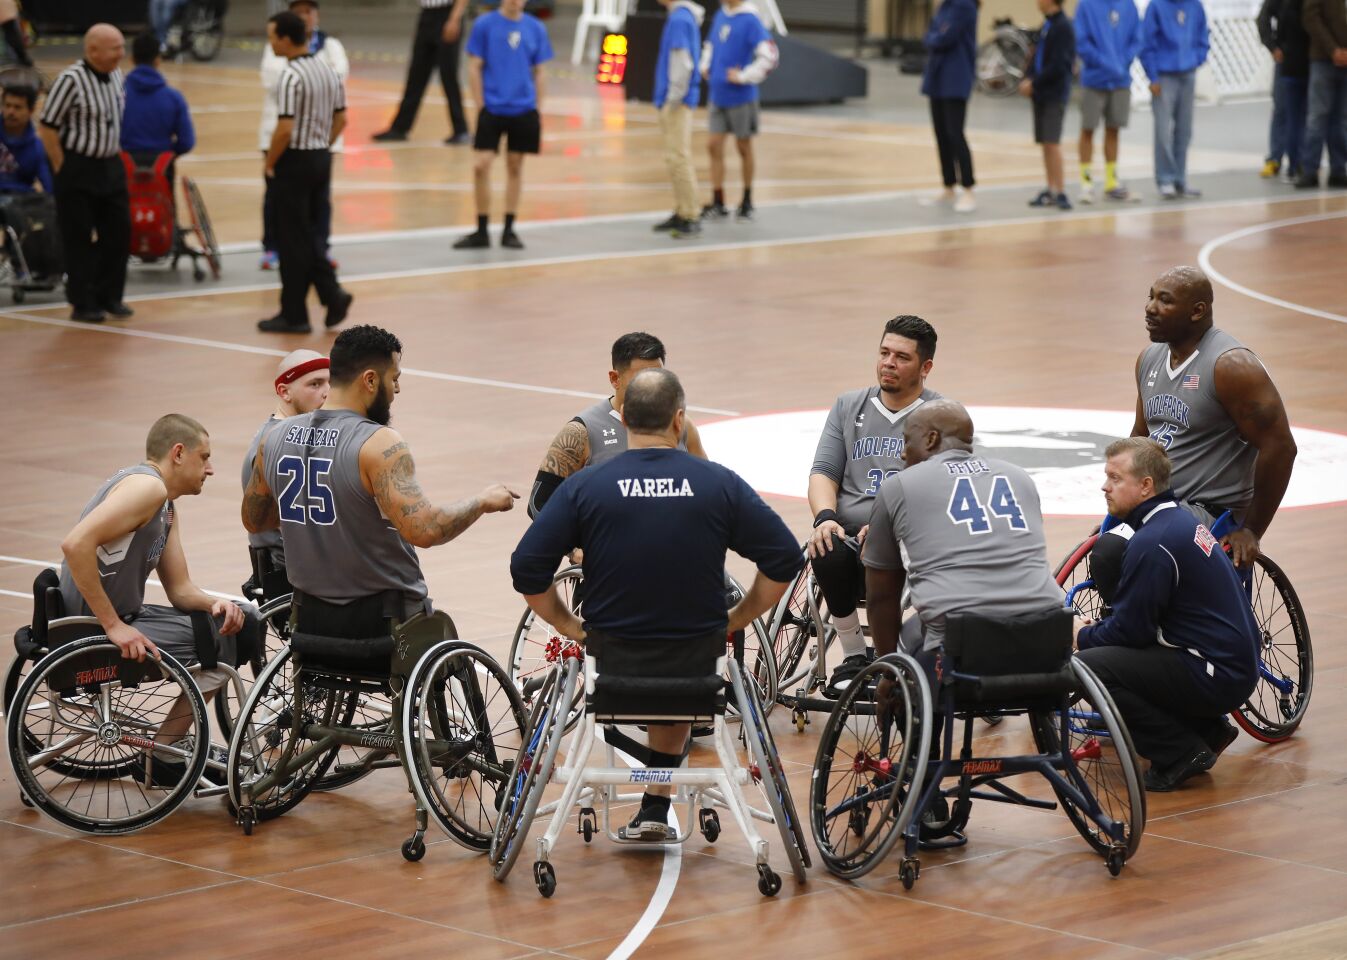 Naval Medical Center San Diego Wolfpack coach Scott Sutton, right, meets with his team during a game against the University of Arizona defend during the 4th Annual Brad Rich Invitational wheelchair basketball tournament at the Del Mar Fairgrounds on Feb. 9, 2020.